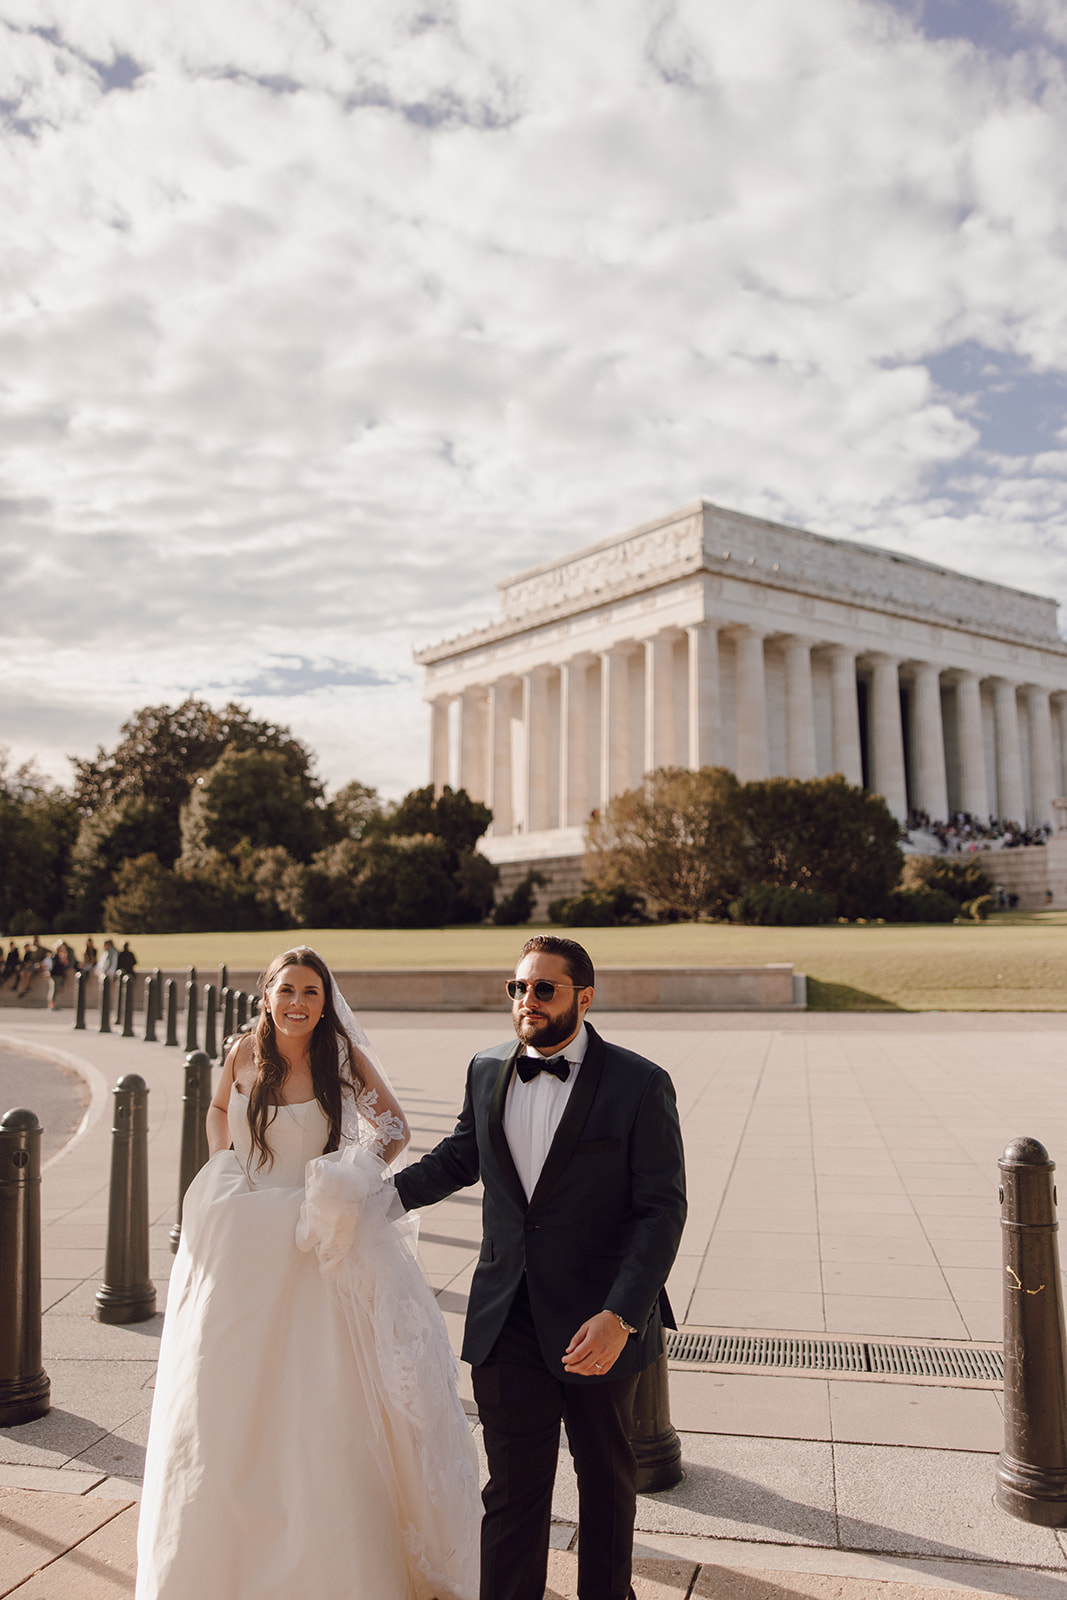 the couple walking away from the Lincoln Memorial